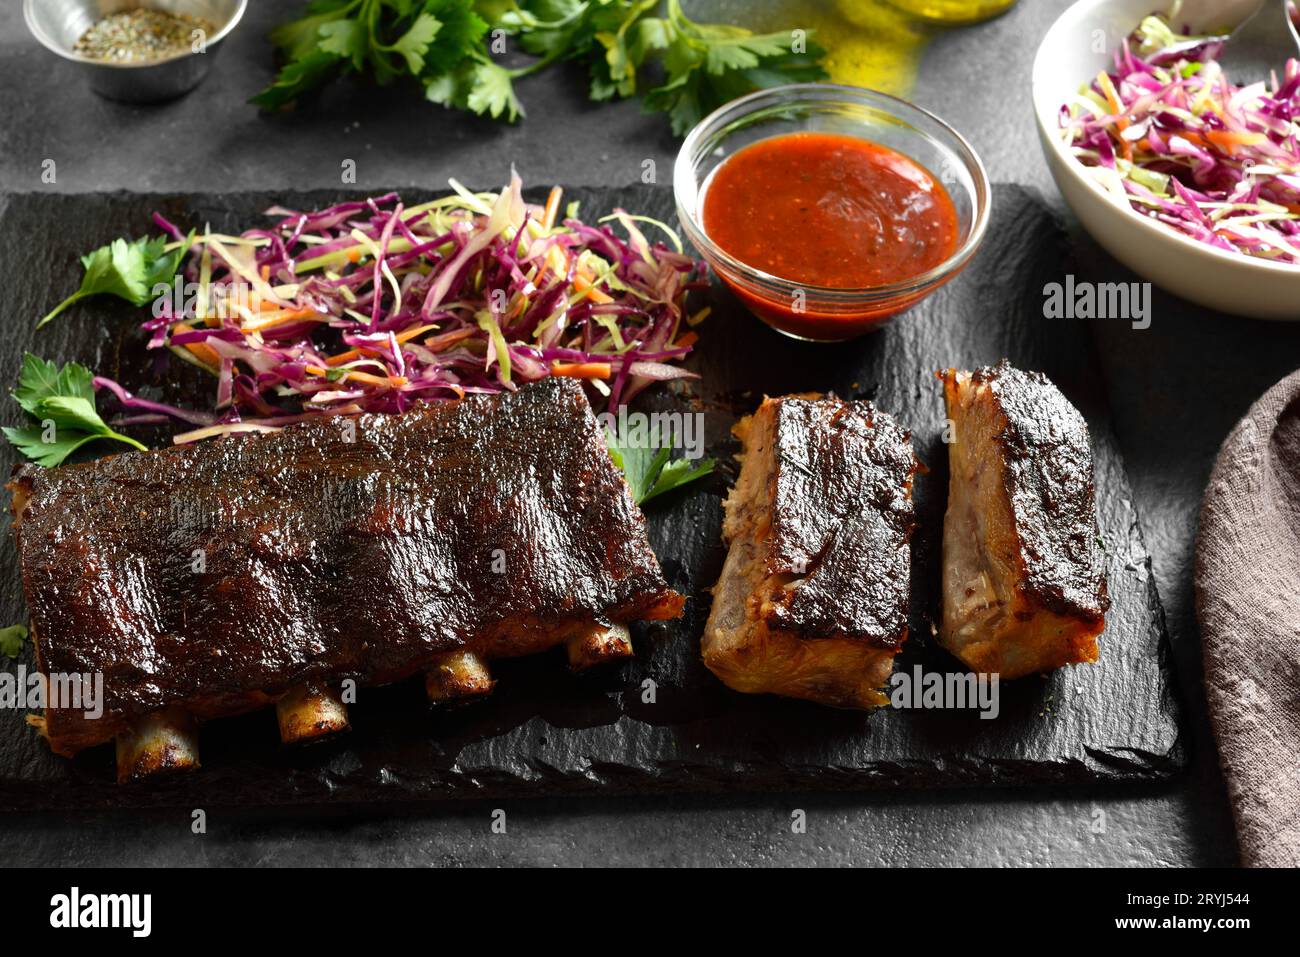 Spicy grilled spare ribs on board on dark stone background. Close up view Stock Photo